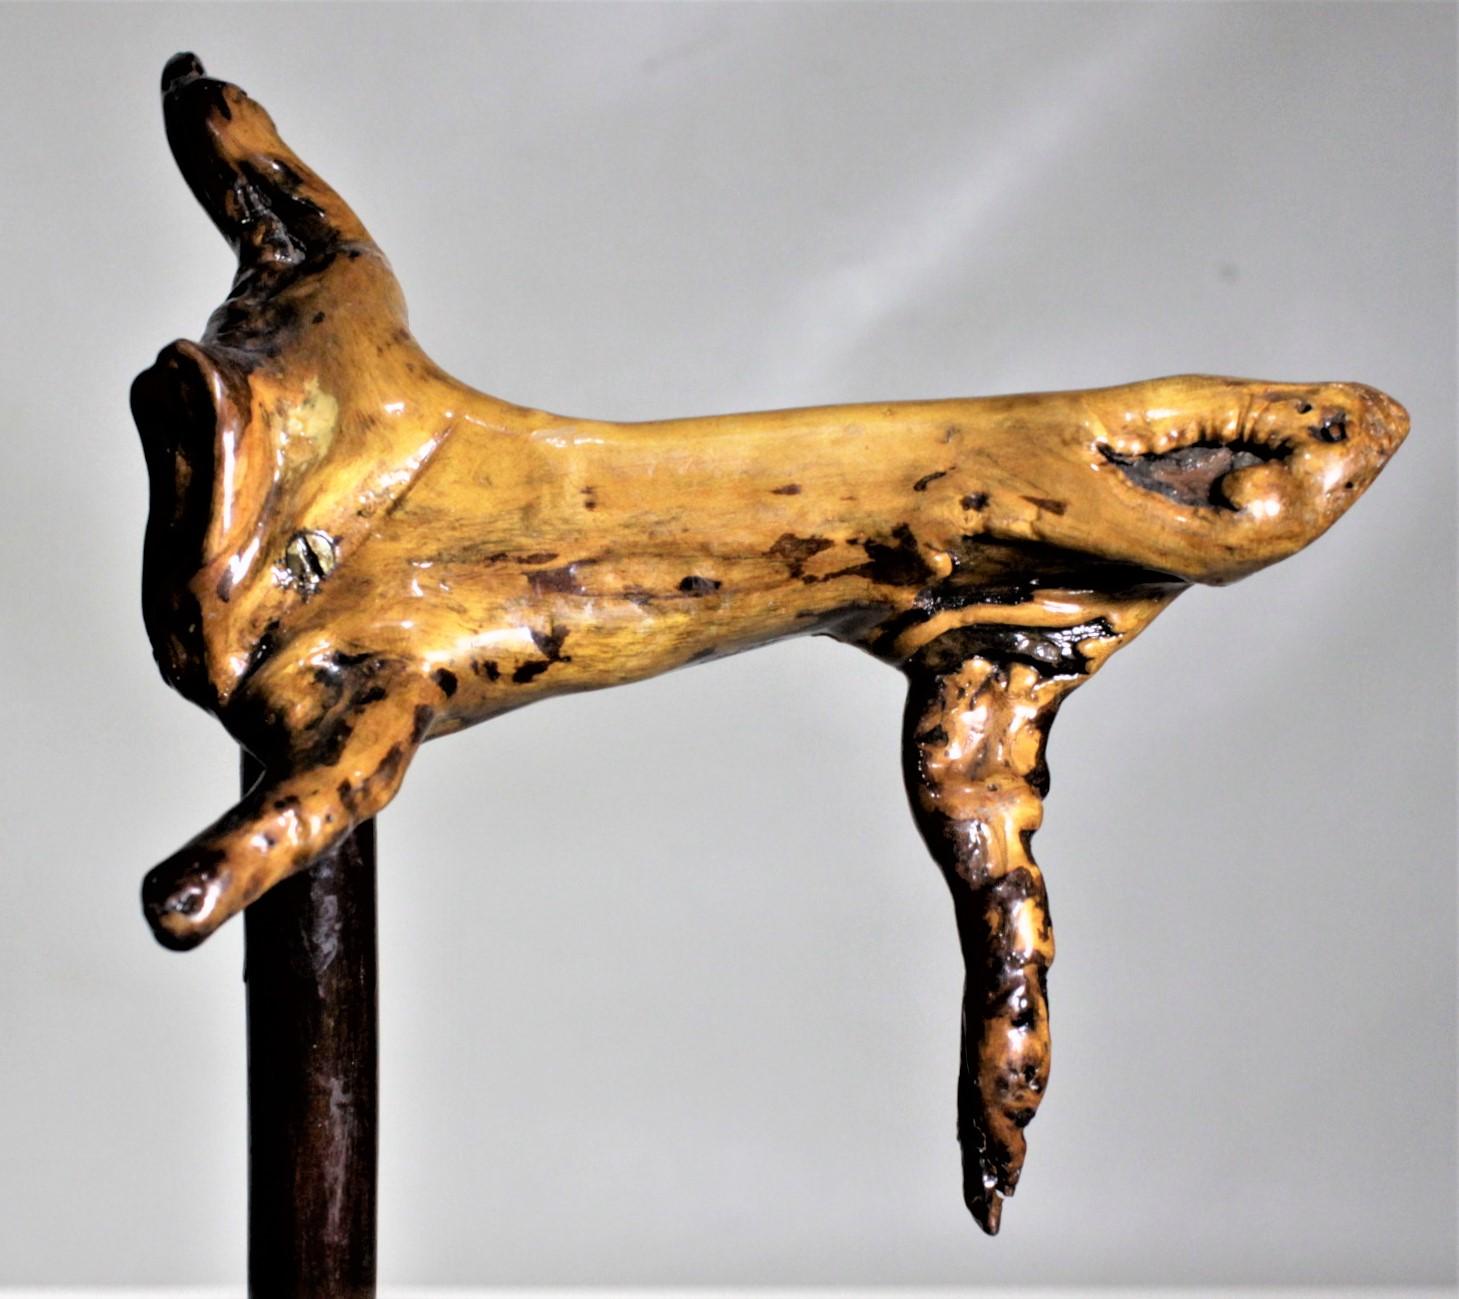 This Folk Art cane or walking stick is completely unmarked, but presumed to have been made in the United States in circa 1920 in the Folk Art style. The handle of the cane is a lacquered piece of burled wood with unconventional sections jettisoning